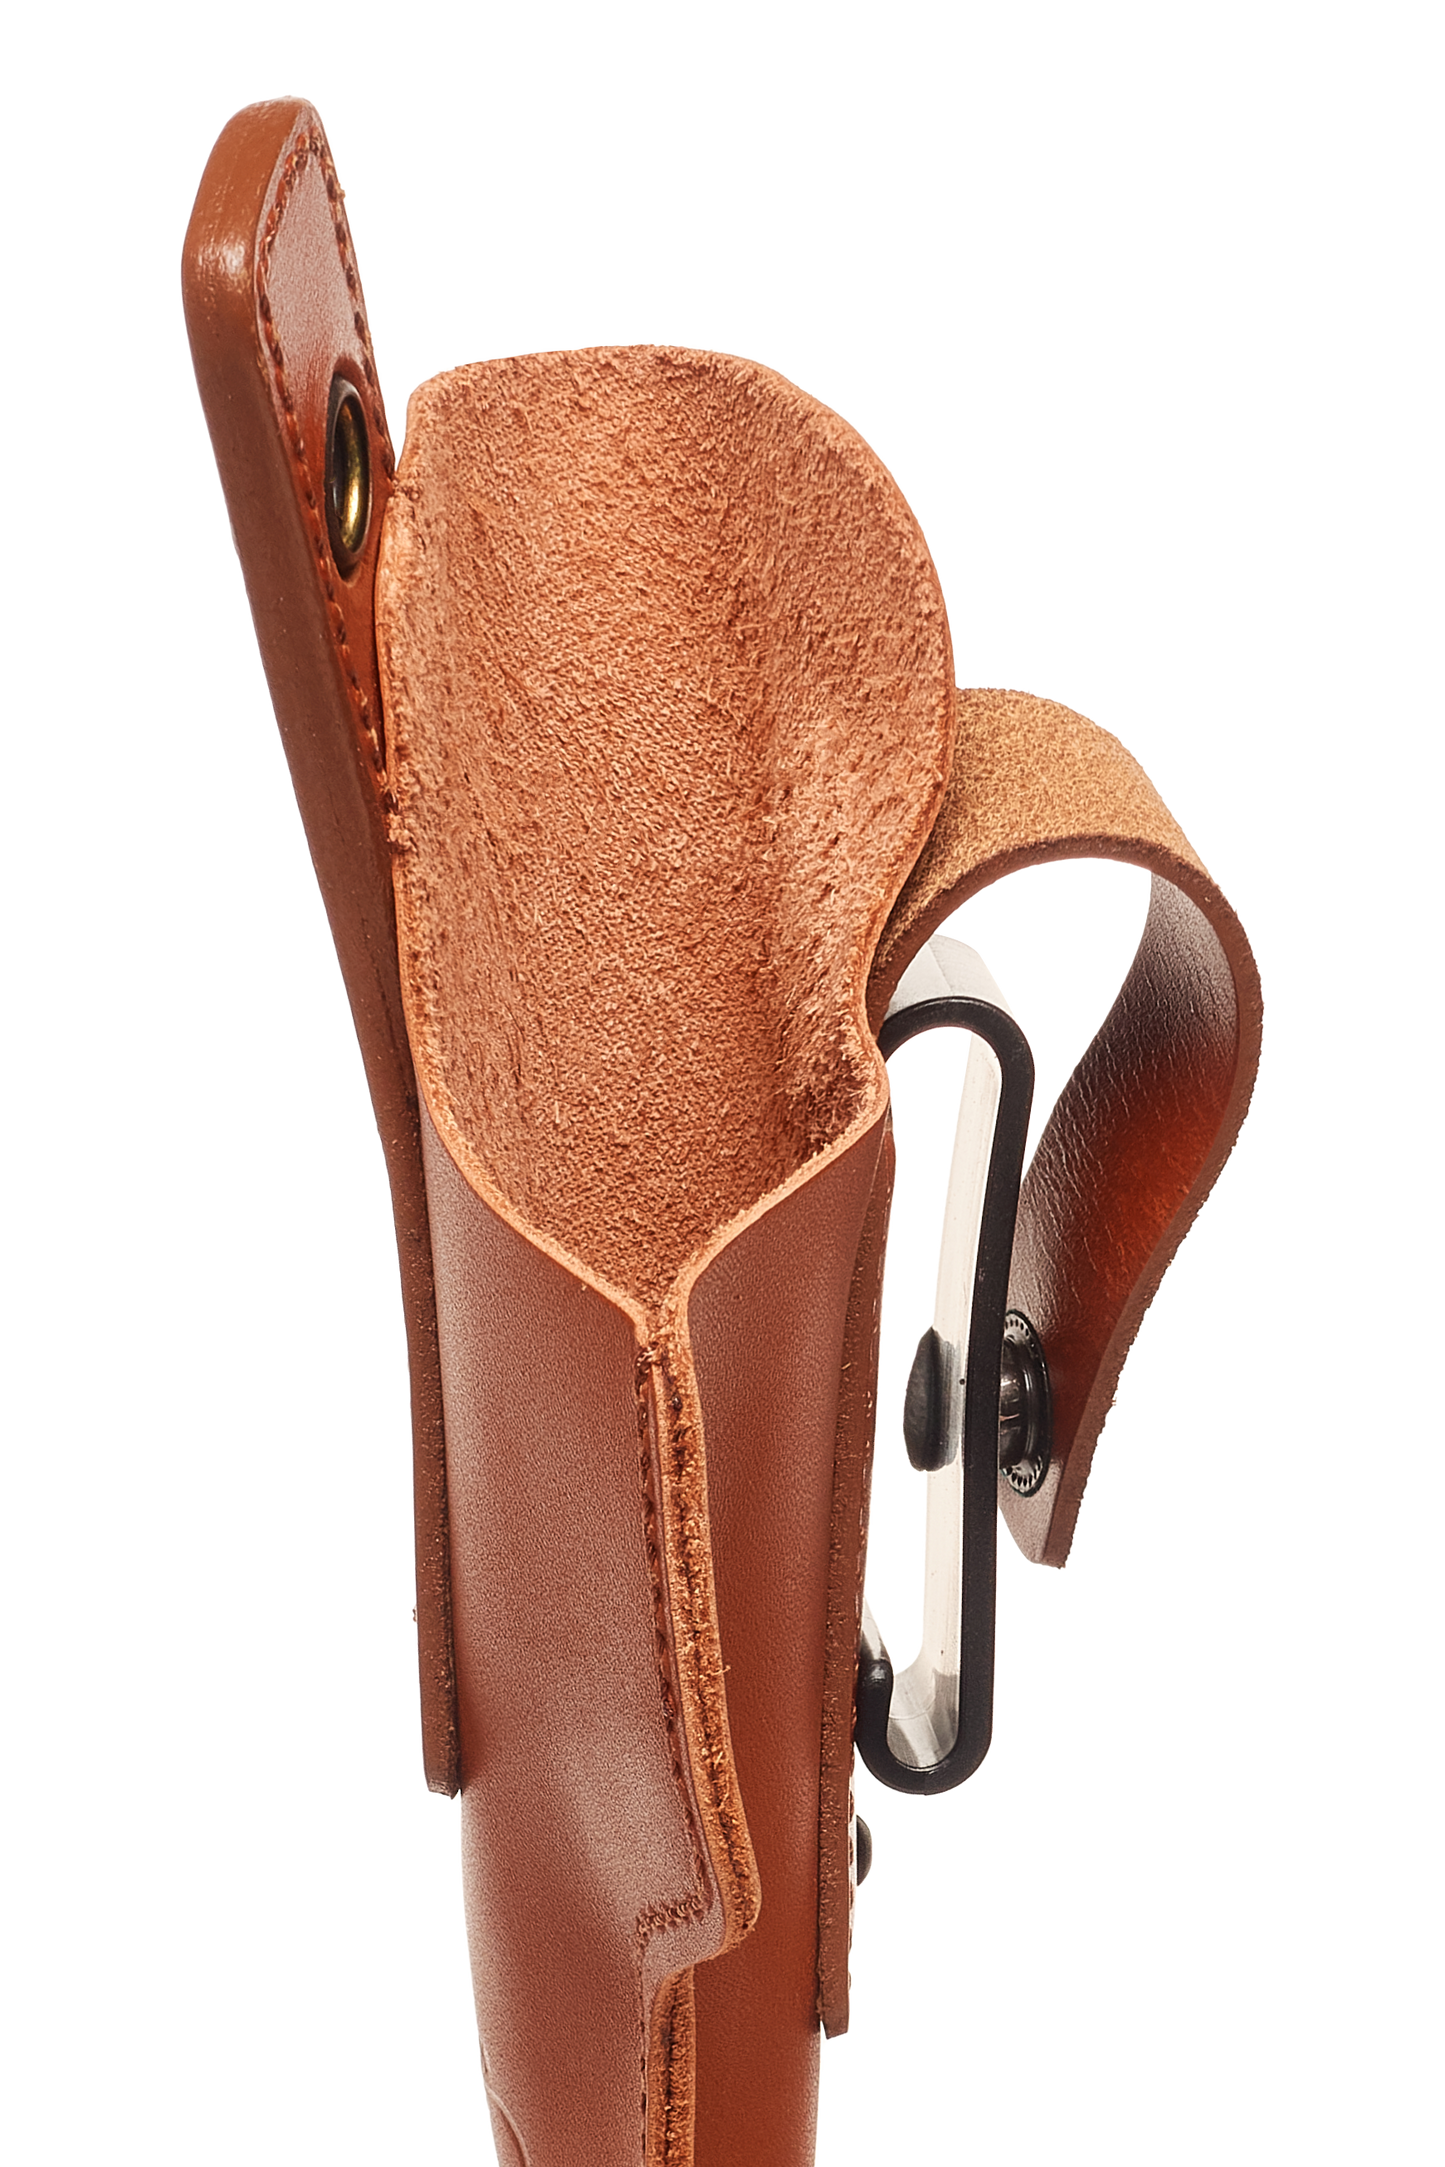 CZ 75 IWB Leather Holster with Belt Clip (K153)